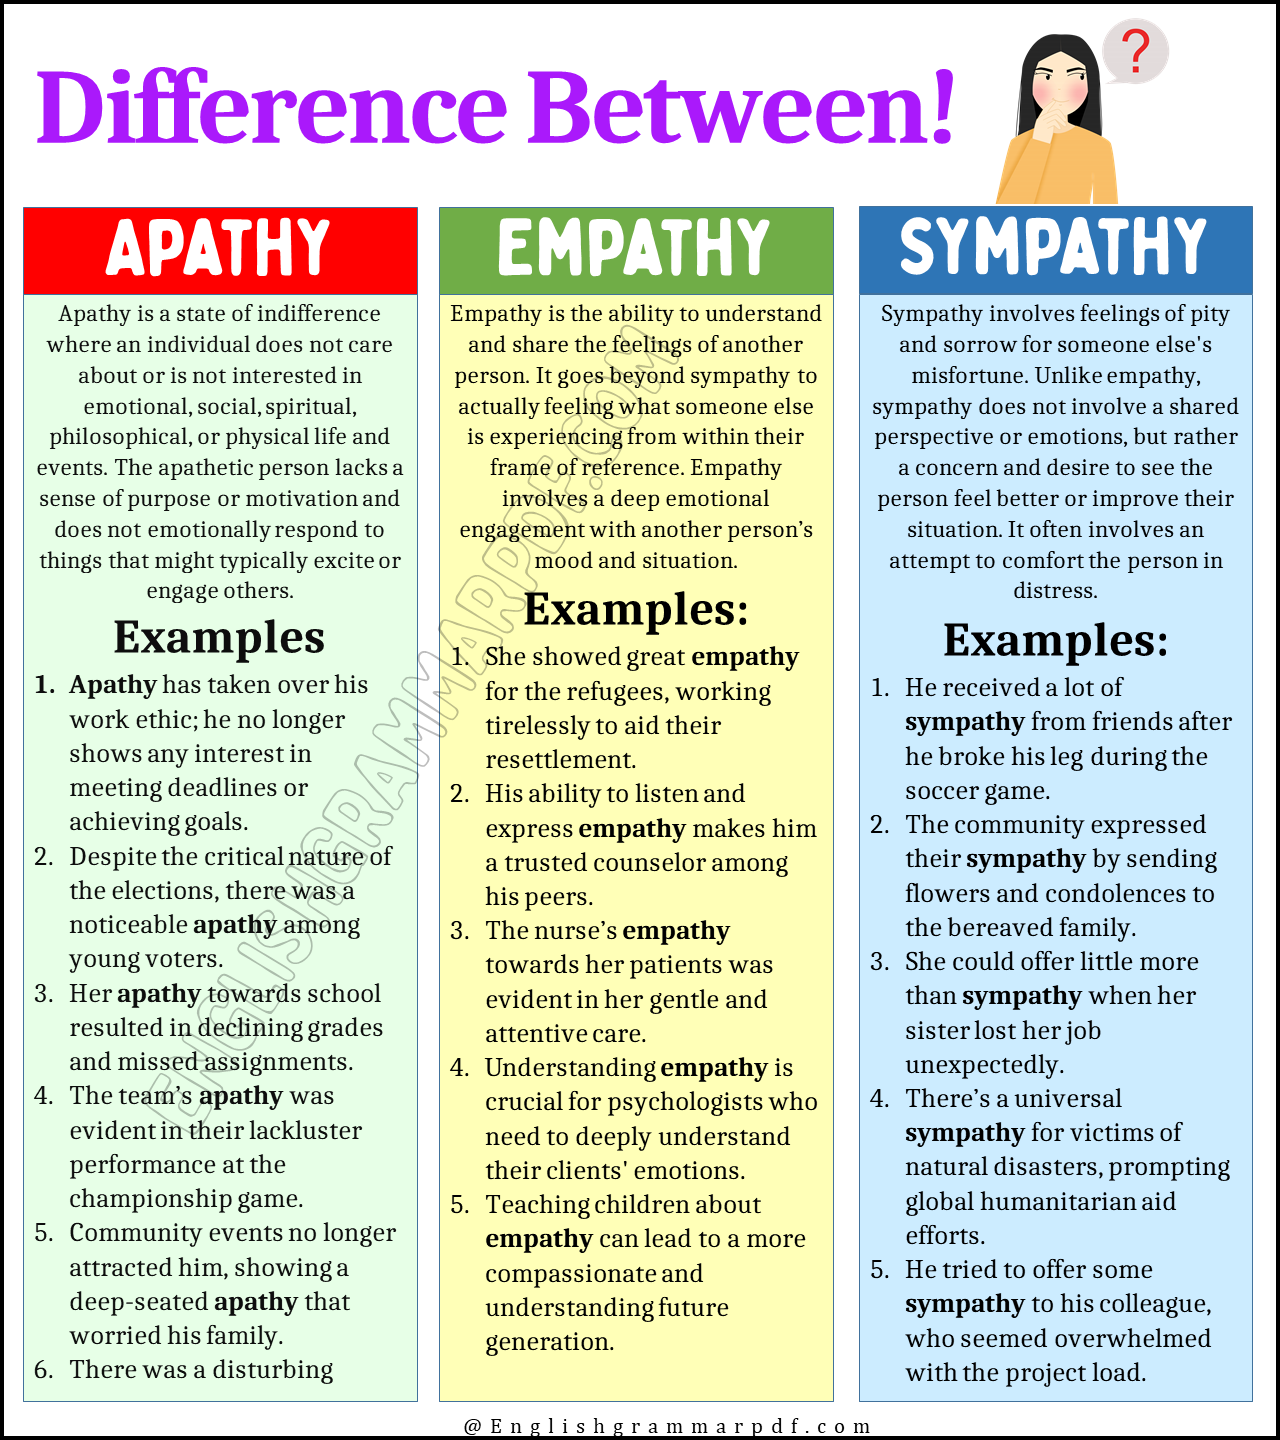 Differences Between Apathy, Empathy, and Sympathy